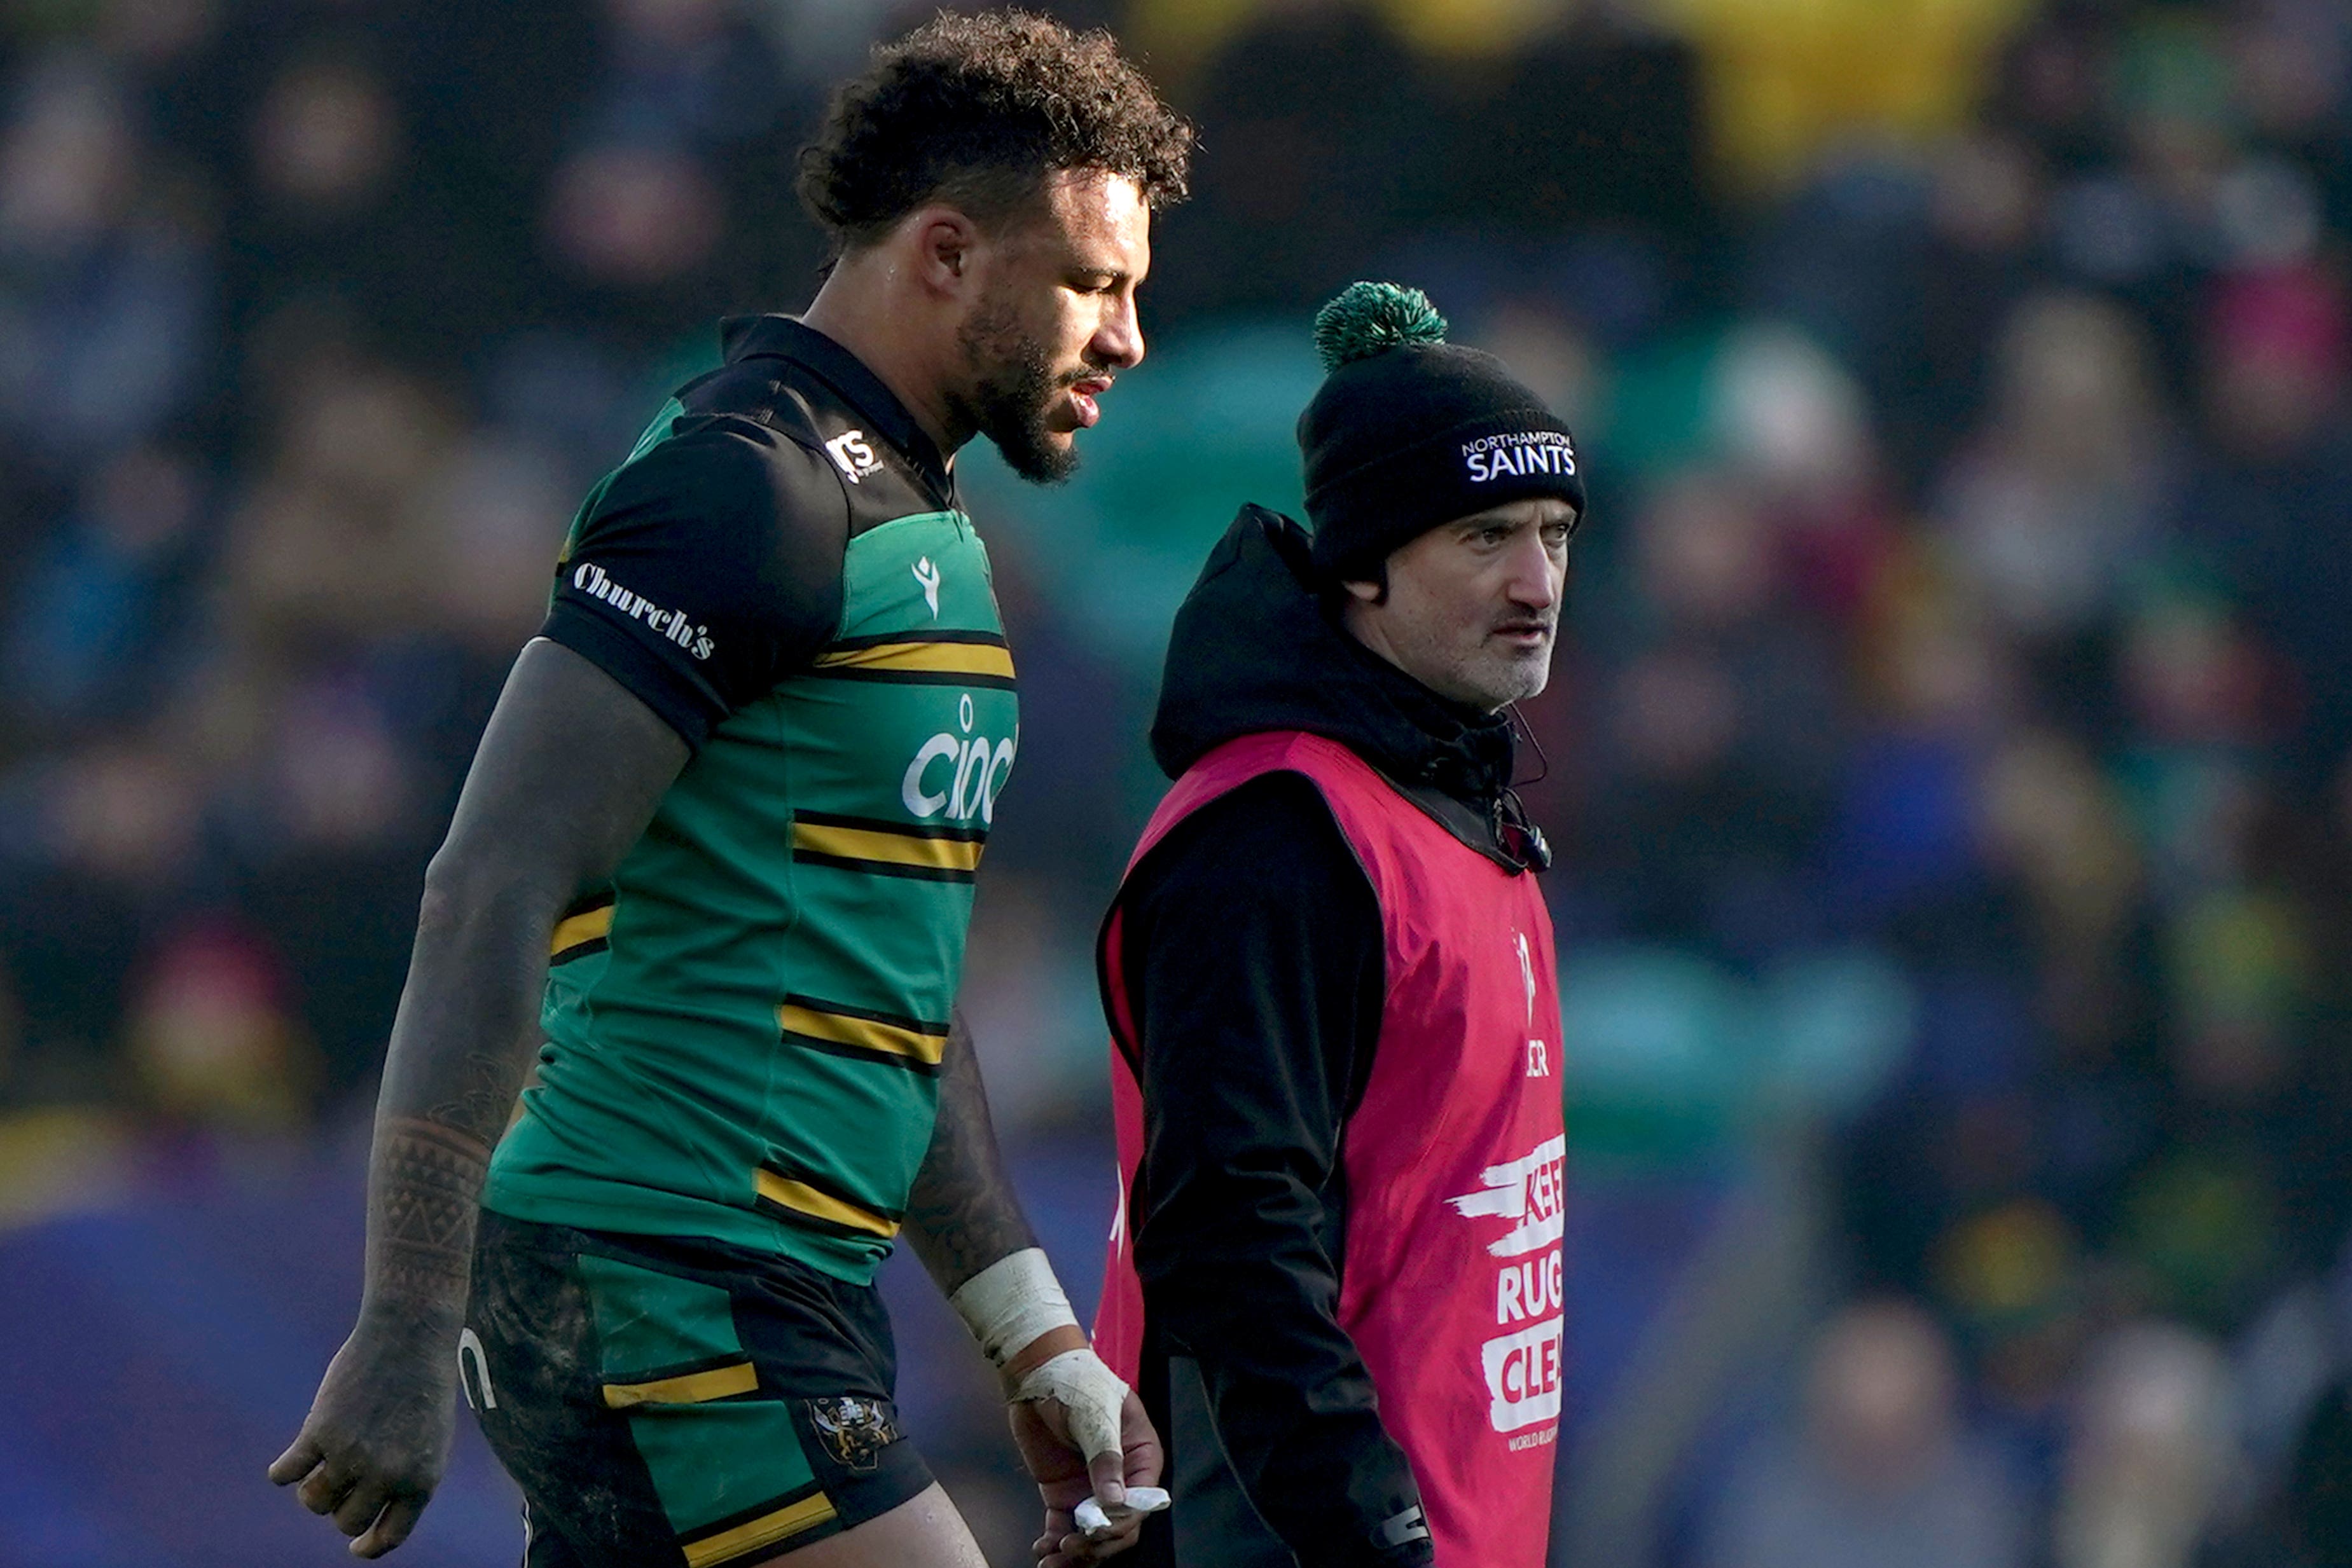 Lawes suffered his latest injury for Northampton on Saturday (Joe Giddens/PA)